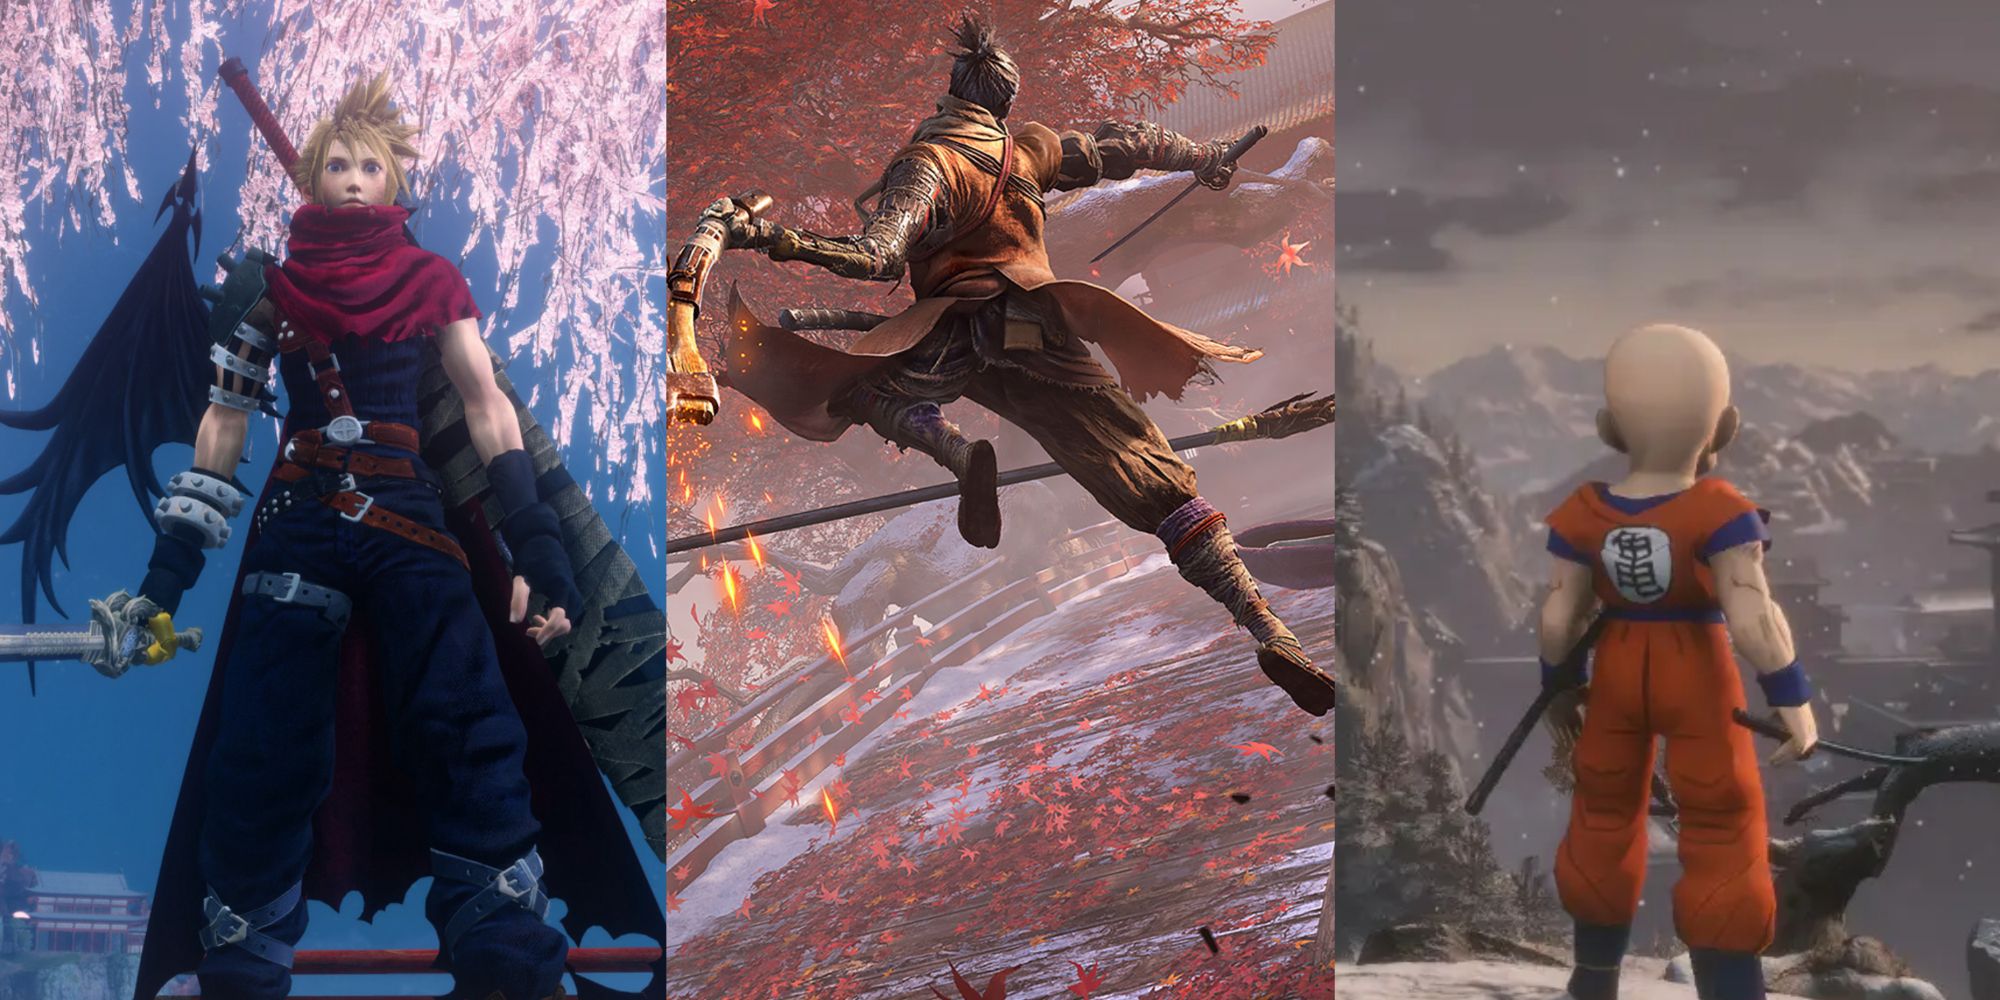 Screenshots showing mods for Sekiro, including Final Fantasy and Dragonball characters